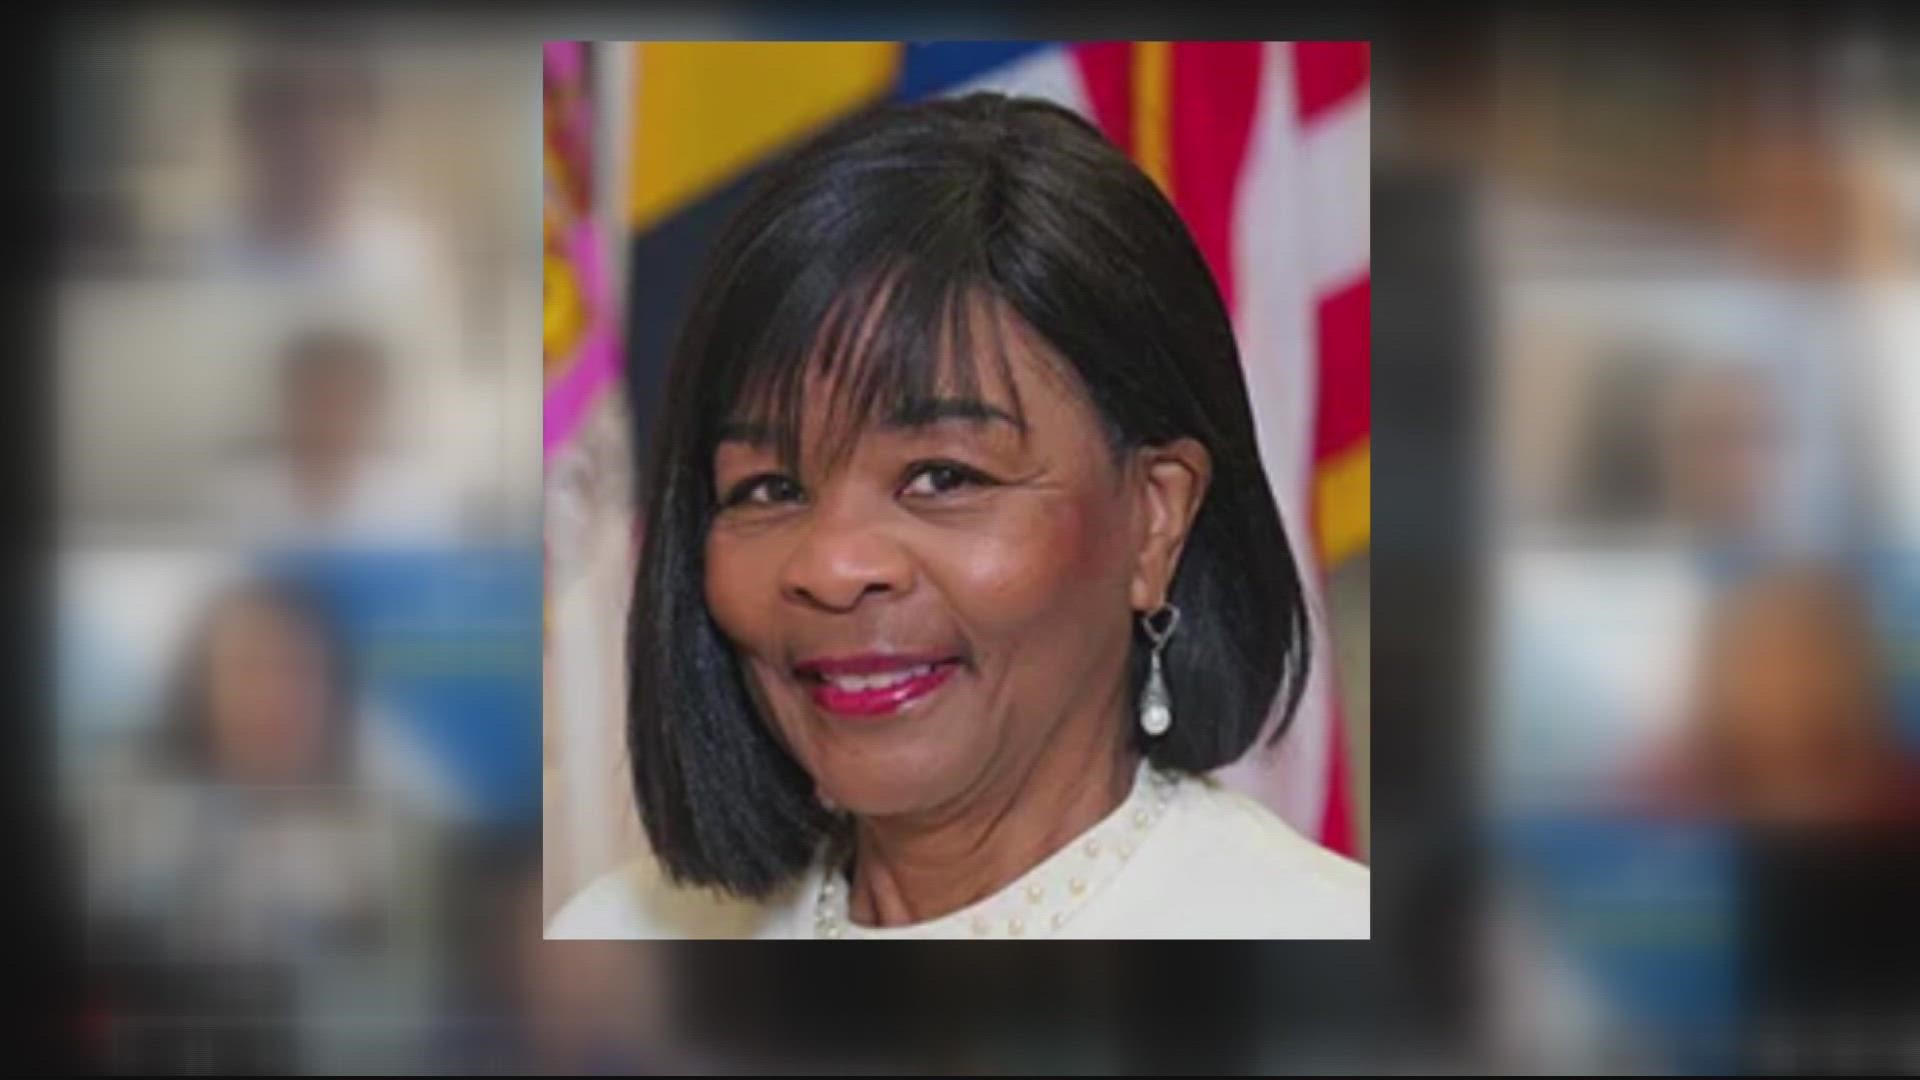 Dr. Juanita Miller, the PGCPS Board Chair has been charged by the state board of education with misconduct in office, willful neglecting duty and incompetence.